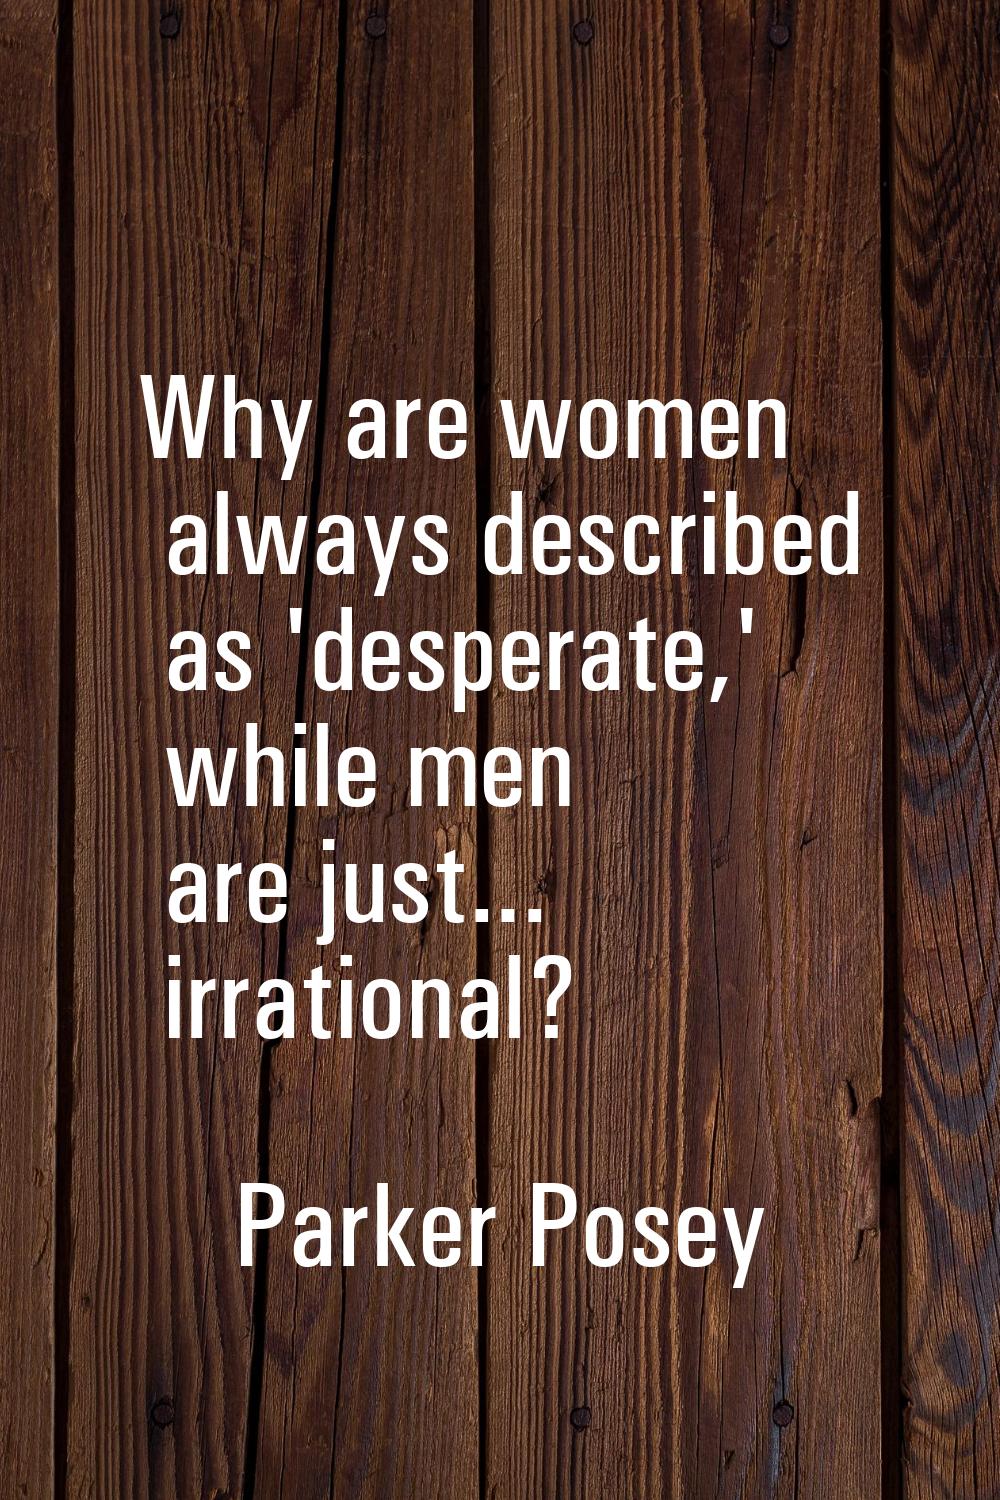 Why are women always described as 'desperate,' while men are just... irrational?